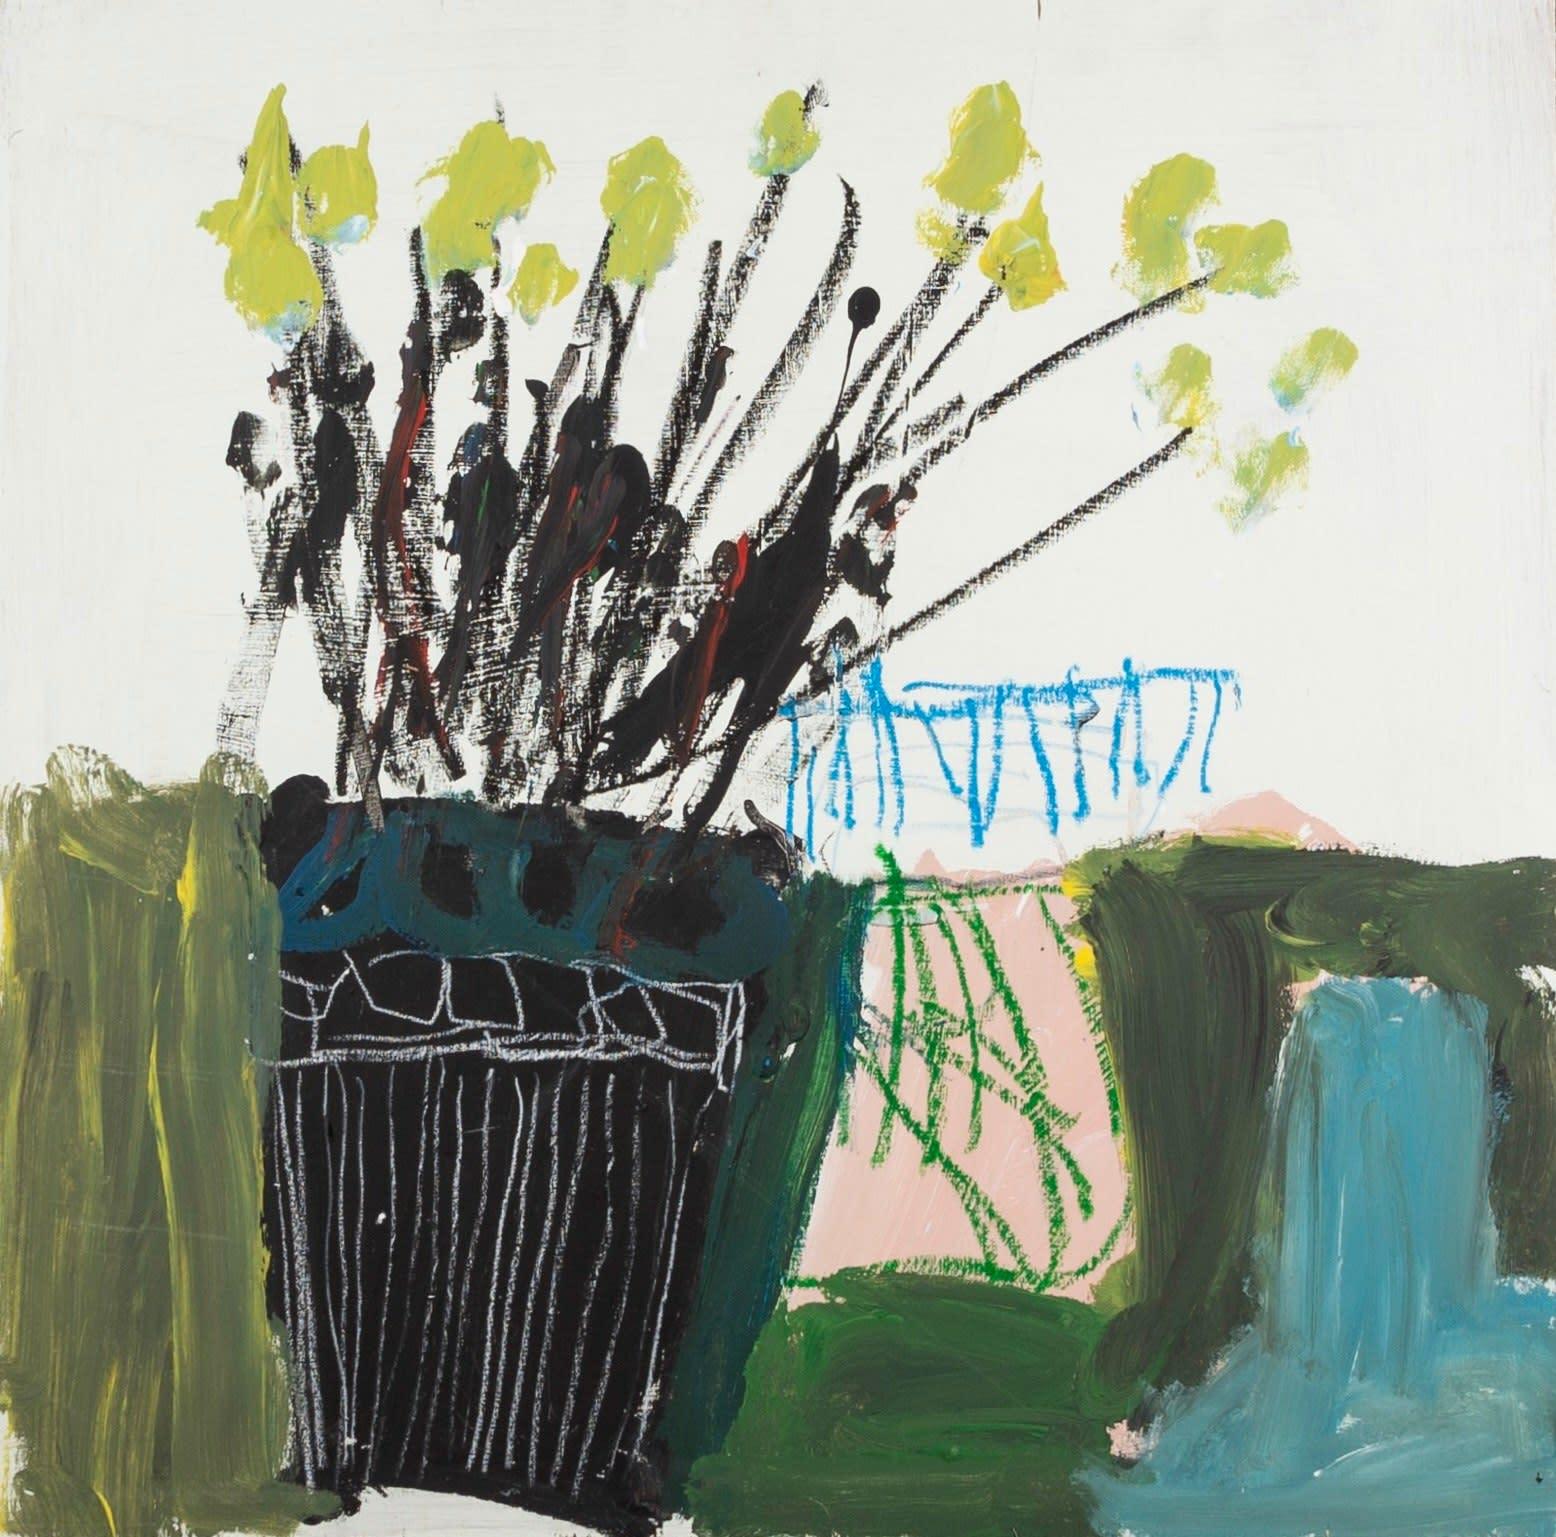 Green Flower Painting by Tom Harford Thompson B. 1964, 2023

Additional information:
Medium: Oil on panel
Dimensions: 60 x 60 cm
23 5/8 x 23 5/8 in
Signed with artist stamp and dated verso.

Tom Harford Thompson was born in Amersham in 1964. He